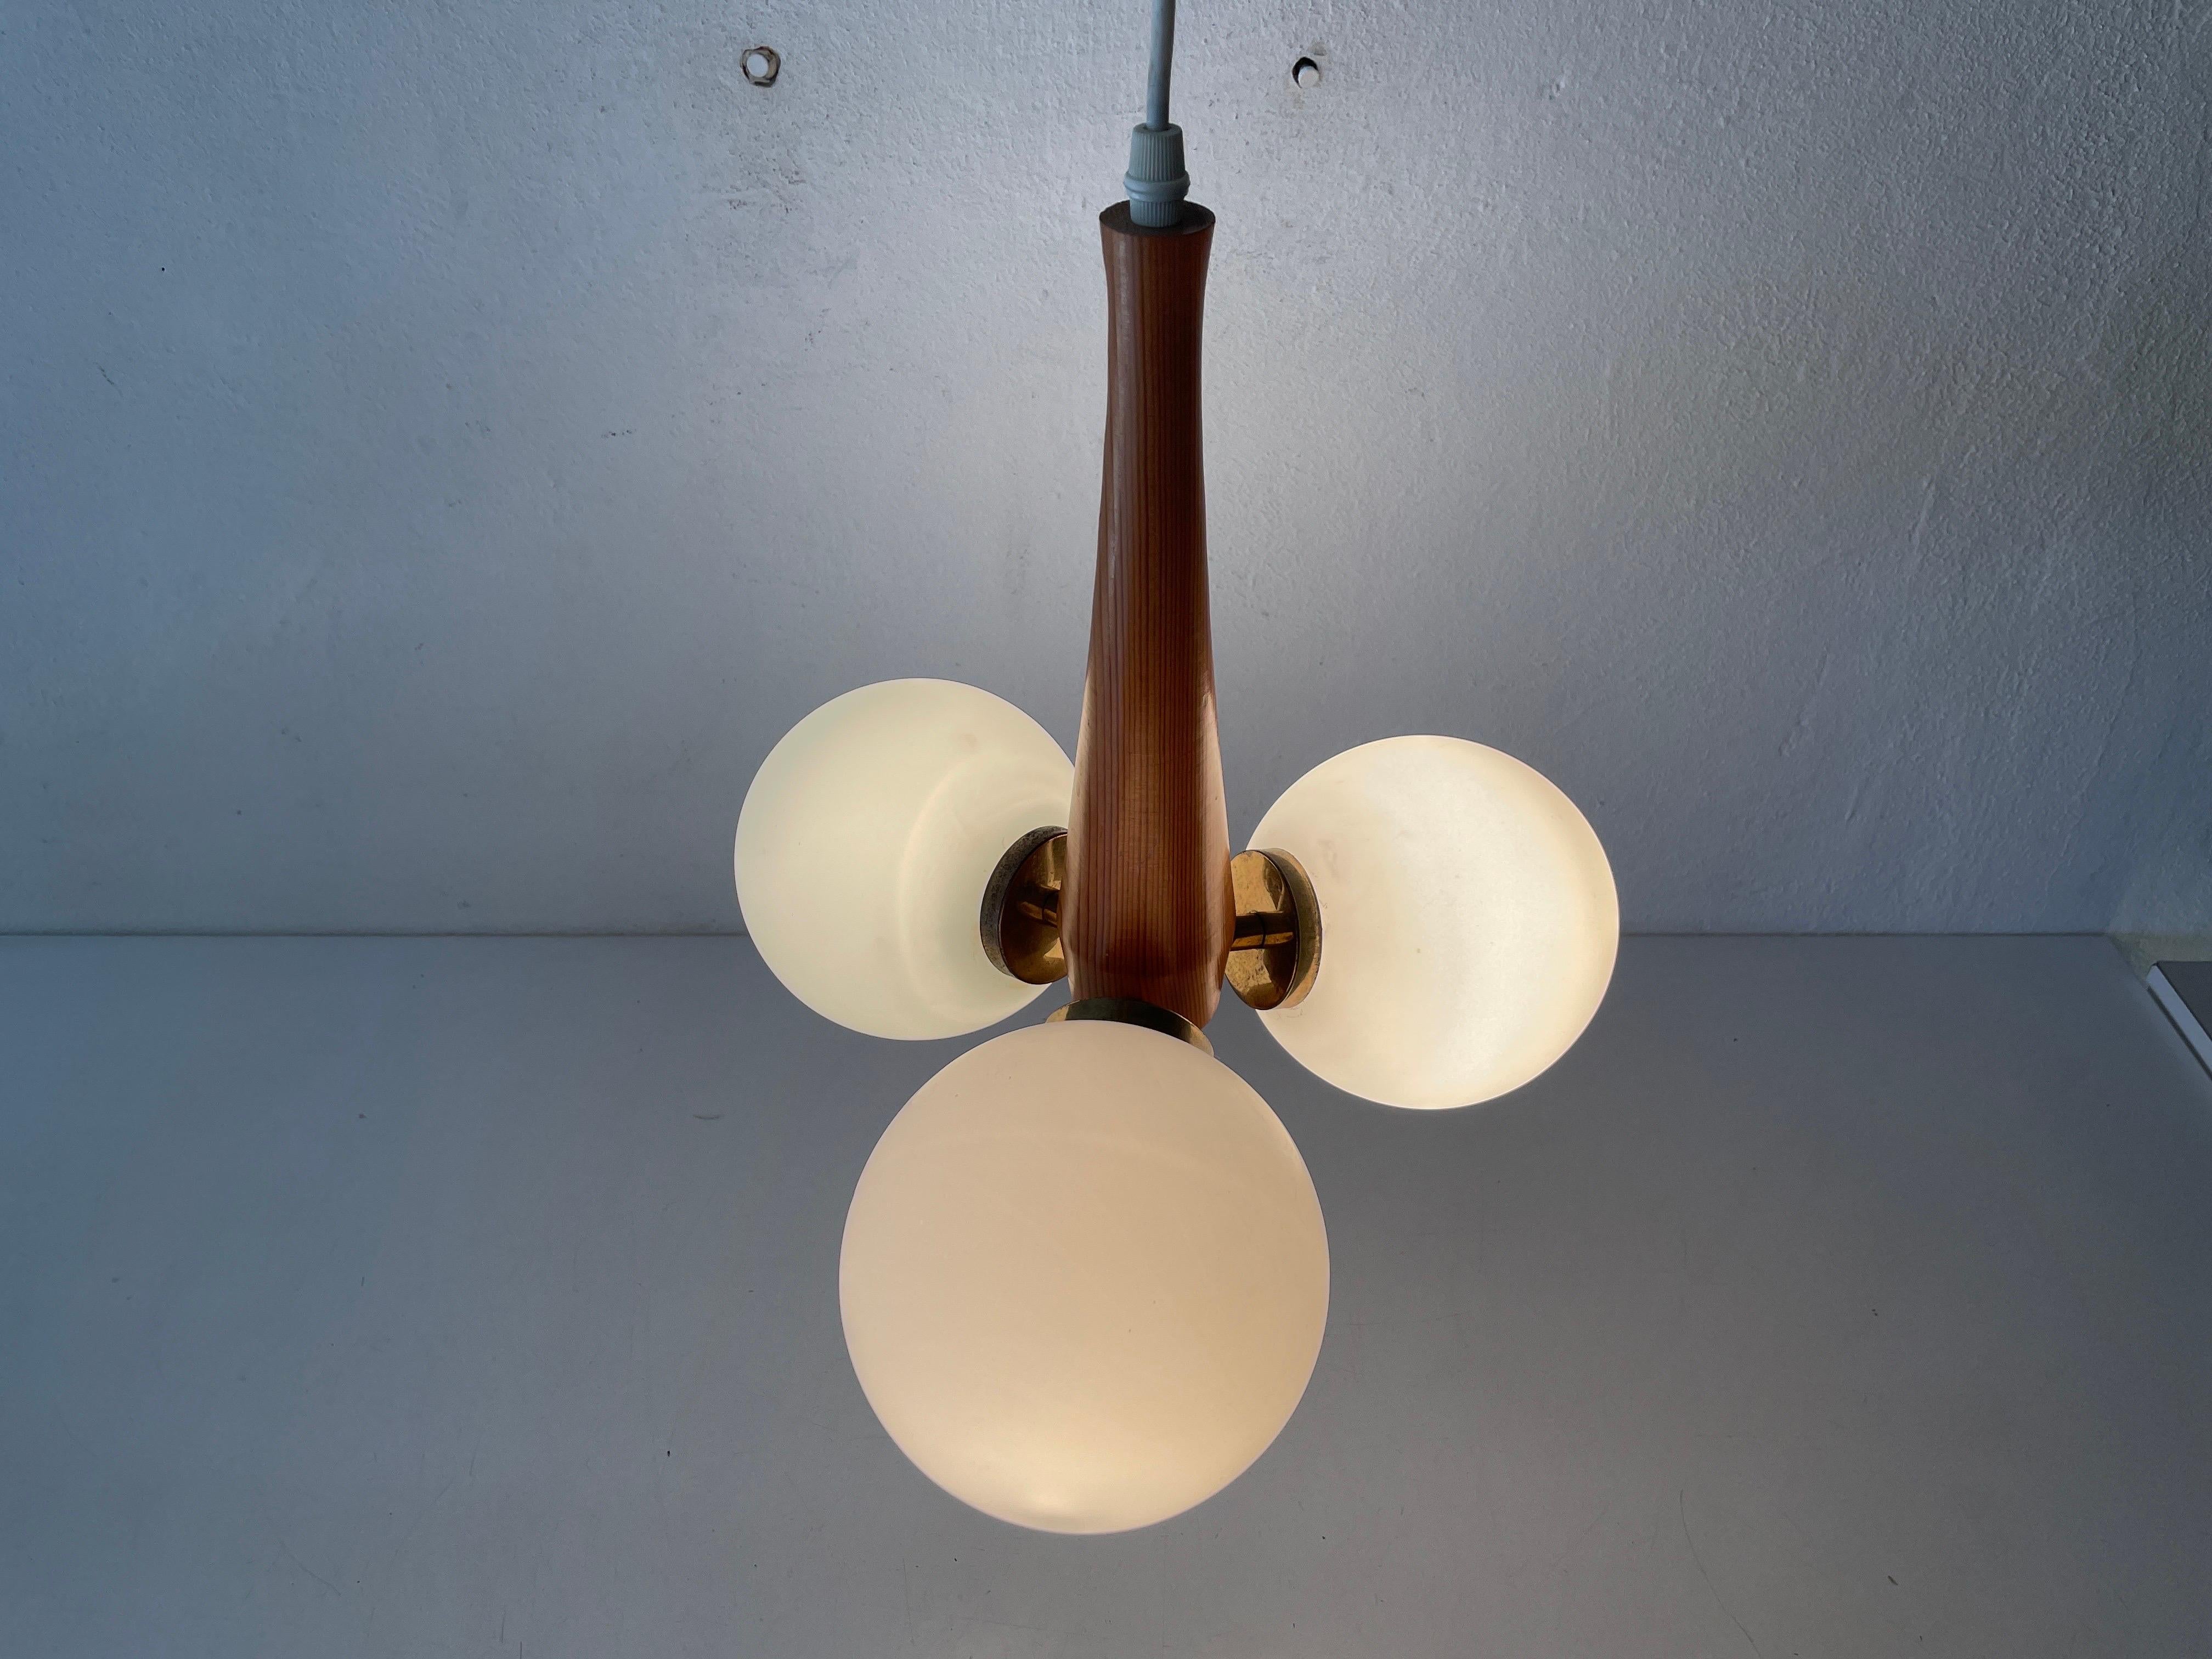 3 Opal Ball Glass and Wood Body Atomic Ceiling Lamp, 1970s, Germany For Sale 4